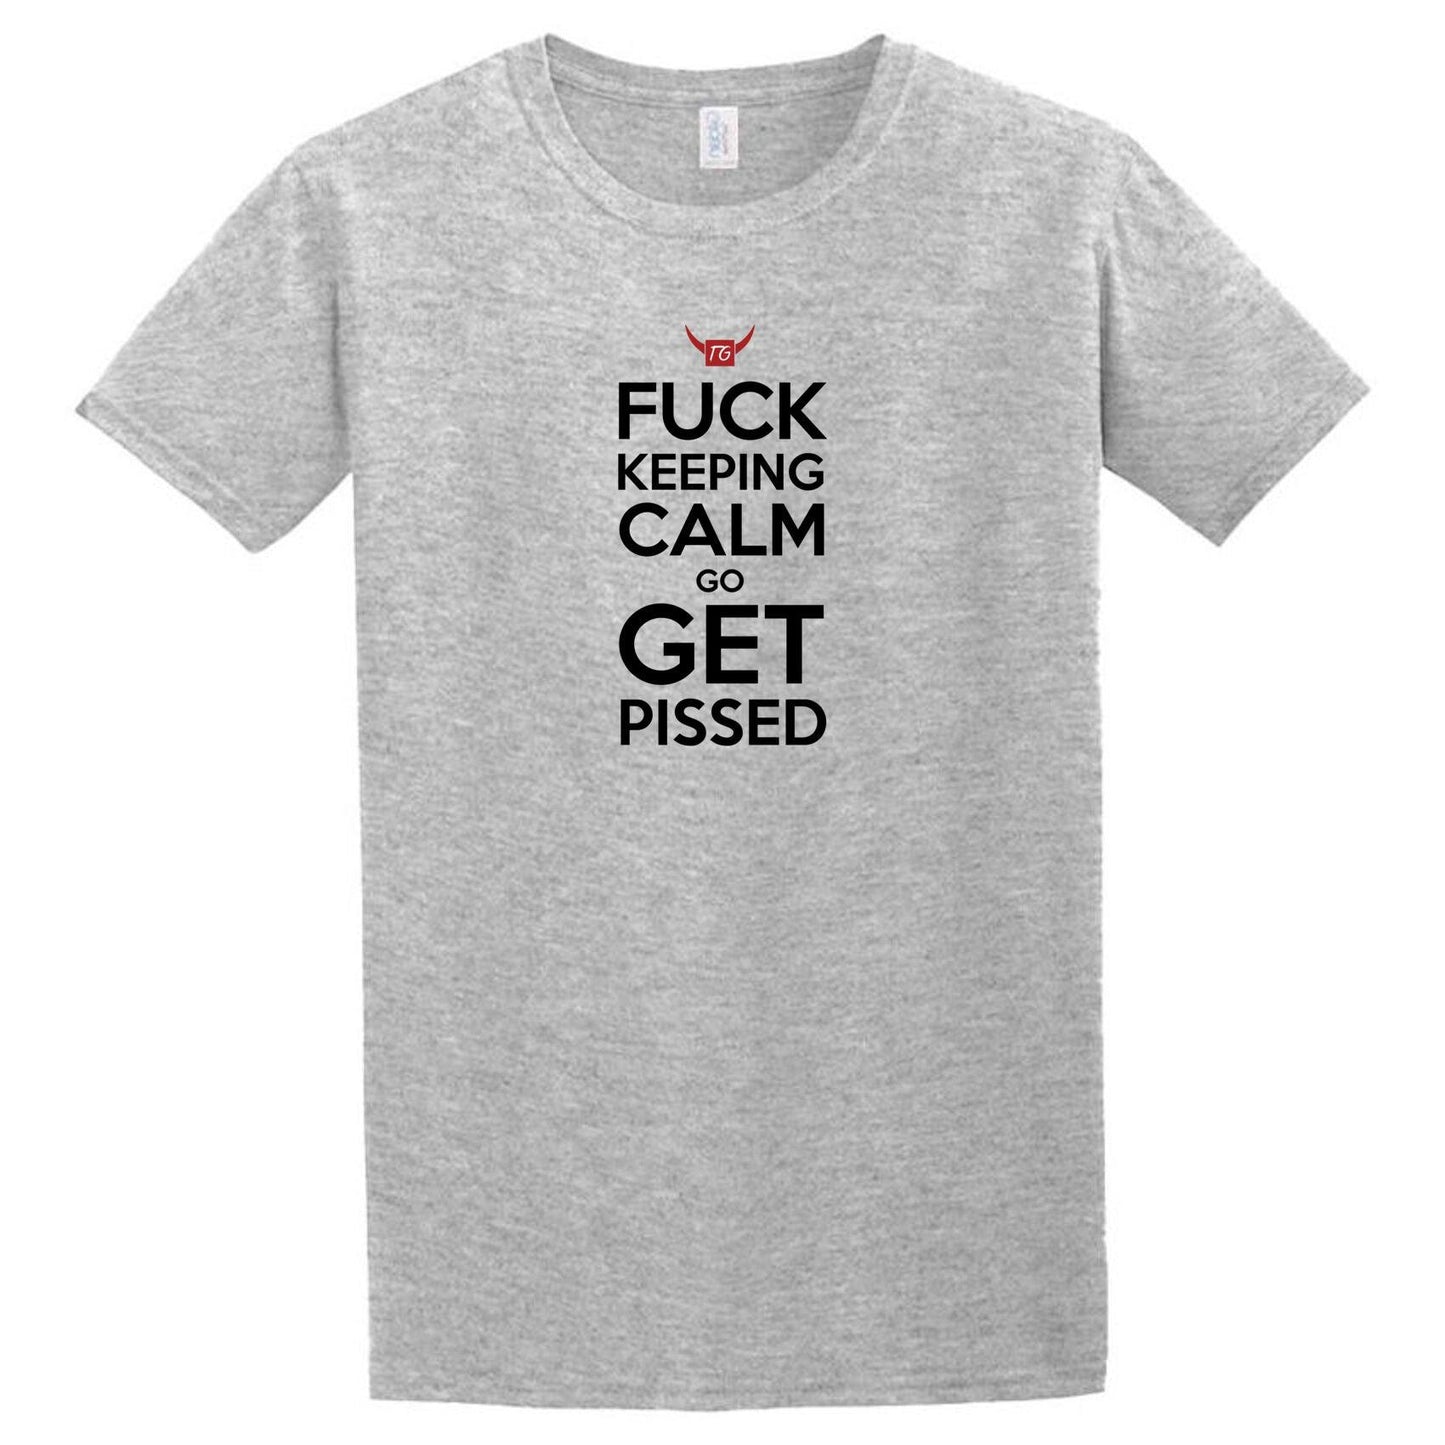 A Twisted Gifts Get Pissed T-Shirt that says fuck keeping calm.